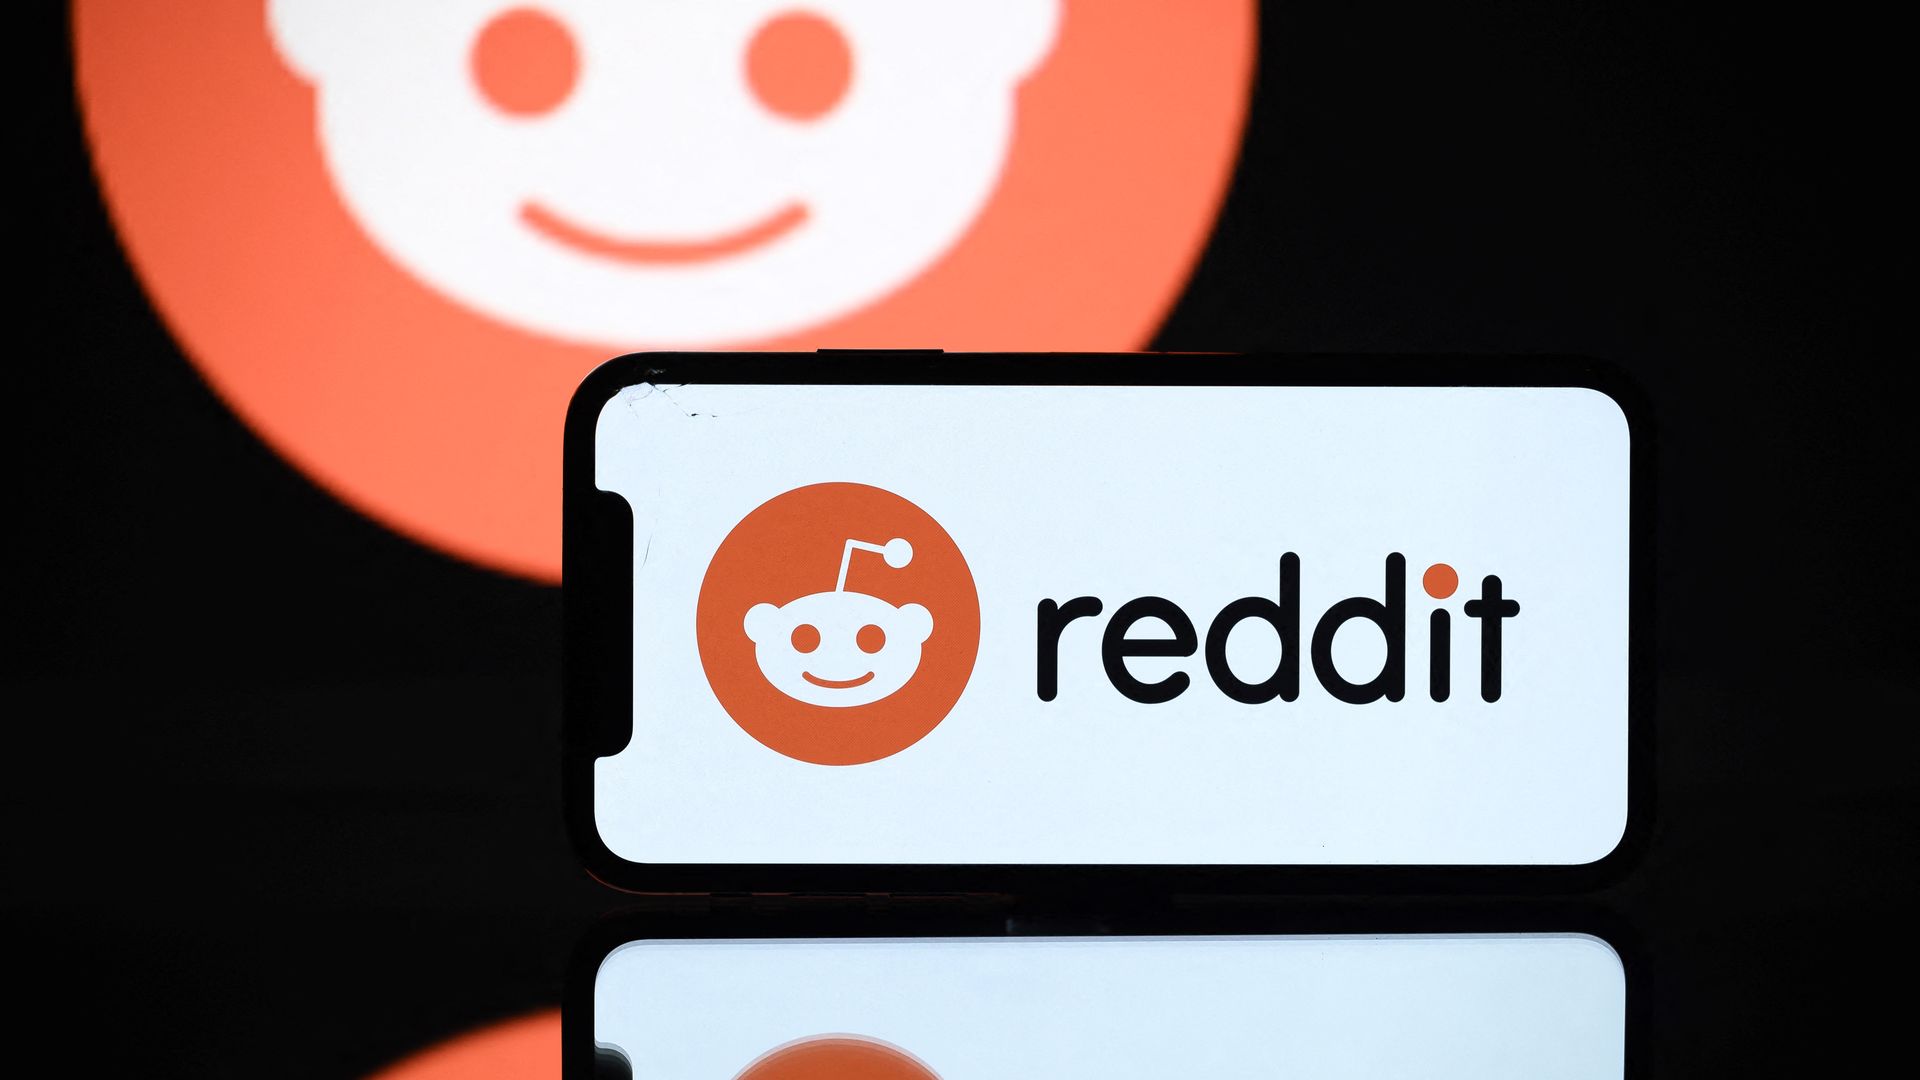 The reddit logo on and behind a phone